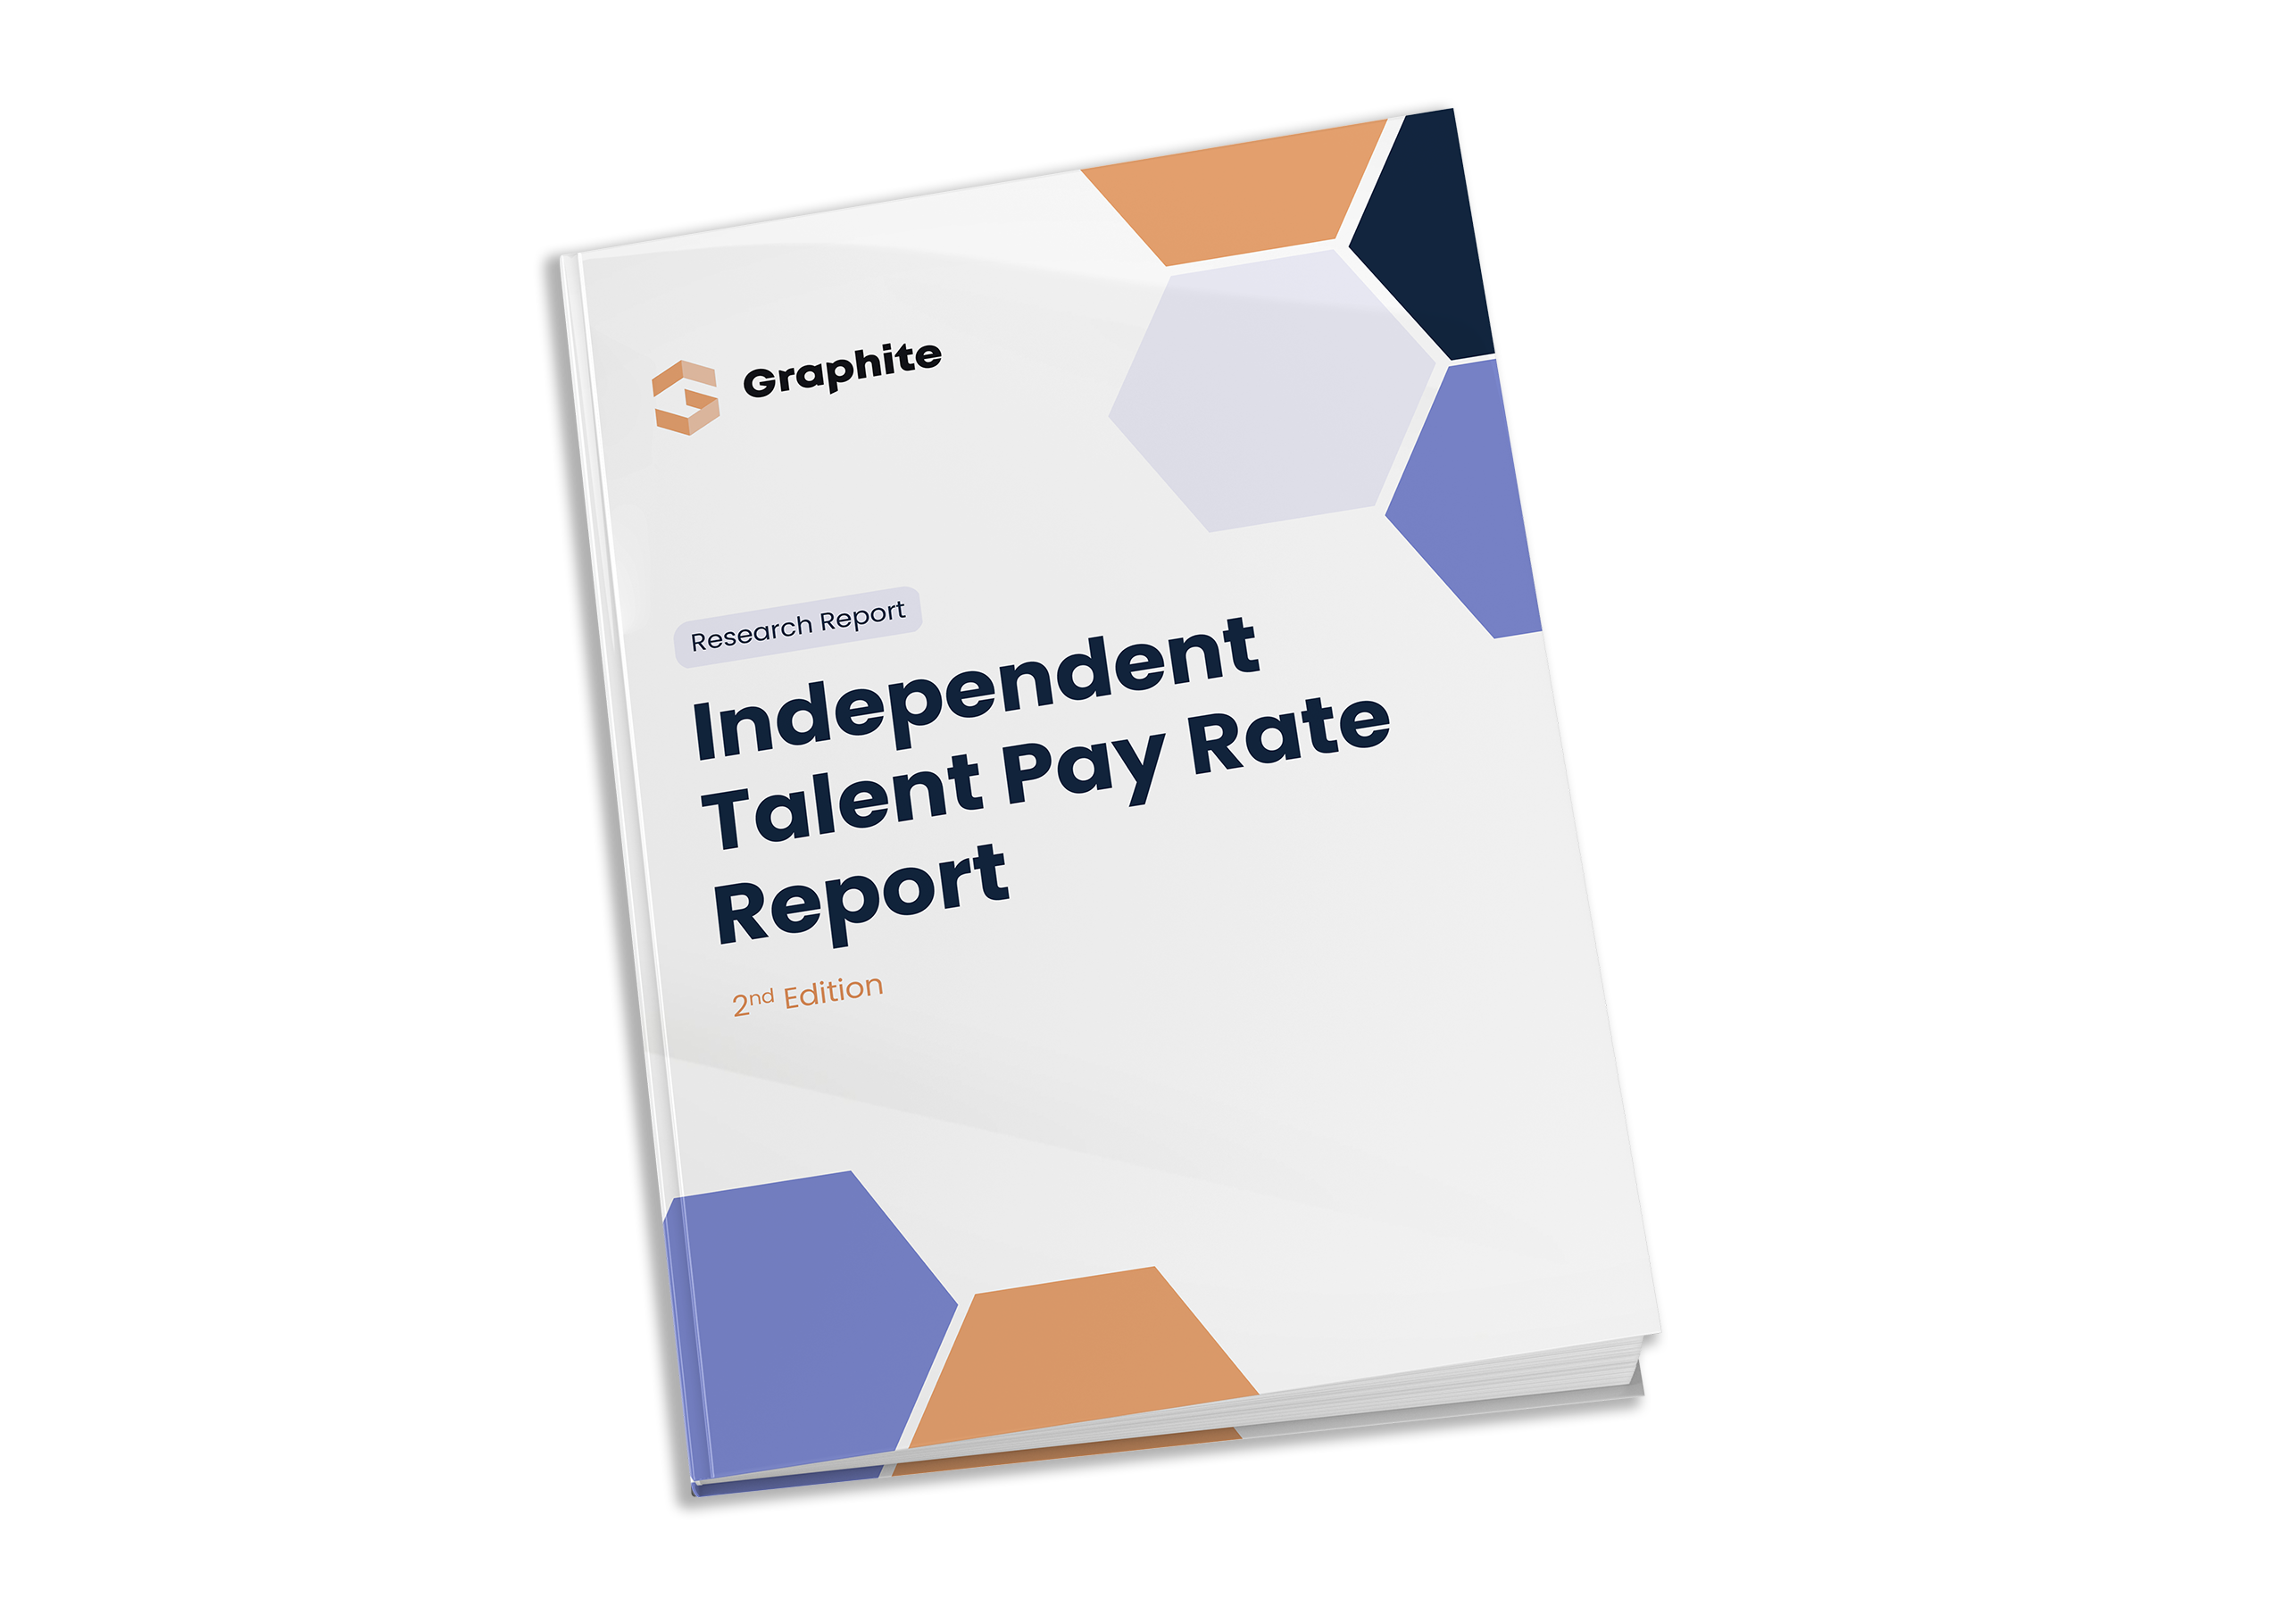 Graphite-Independent Talent Pay Rate Report-2nd Edition